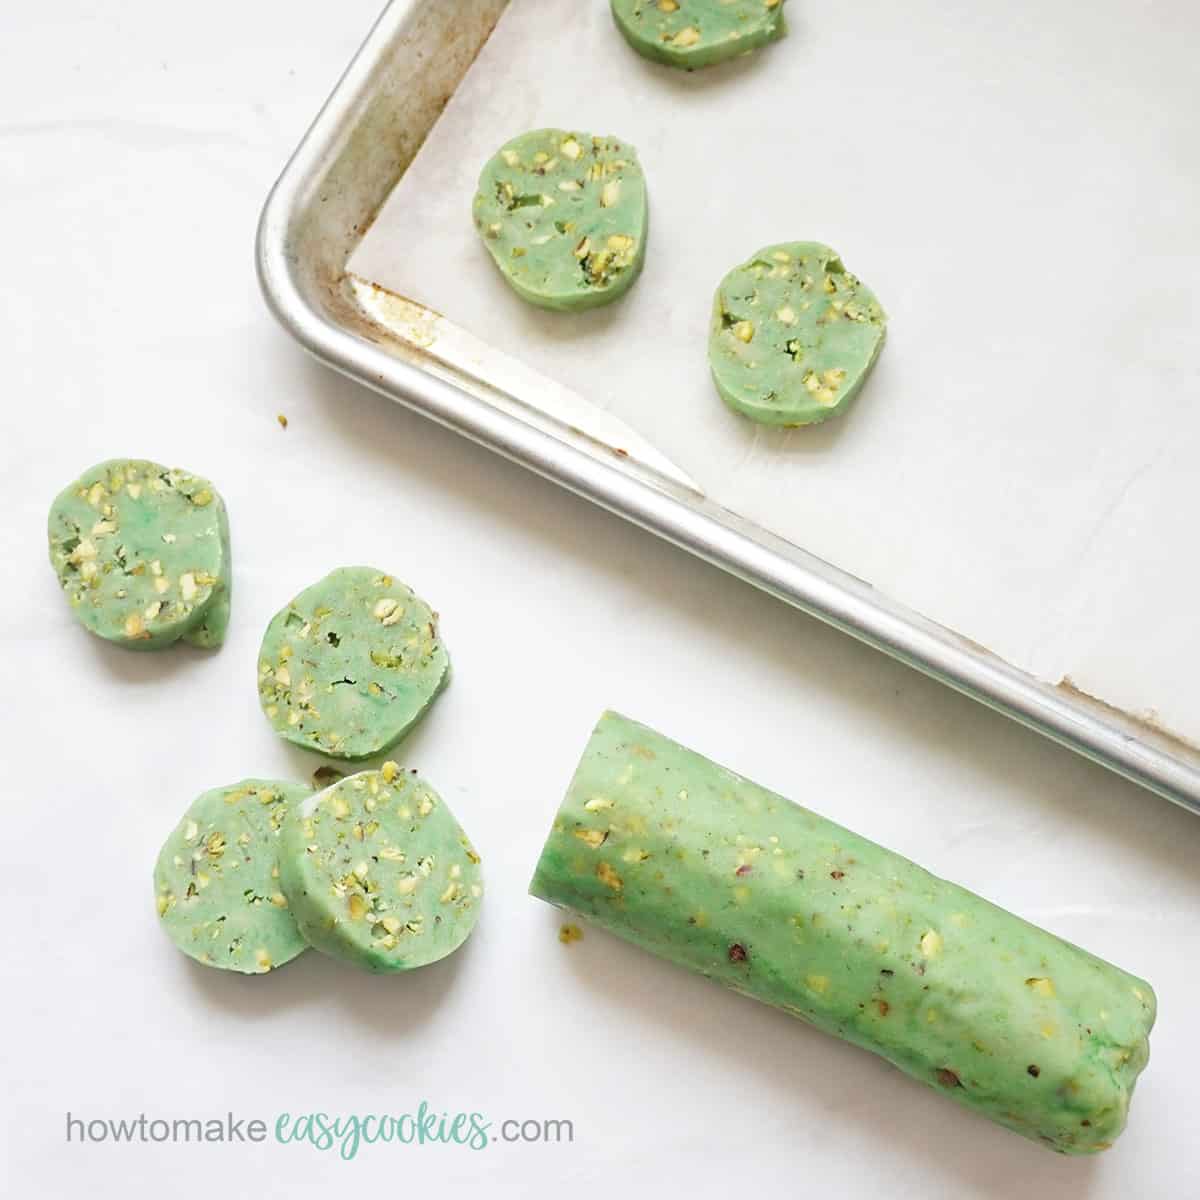 slice and bake refrigerated pistachio cookies on baking tray